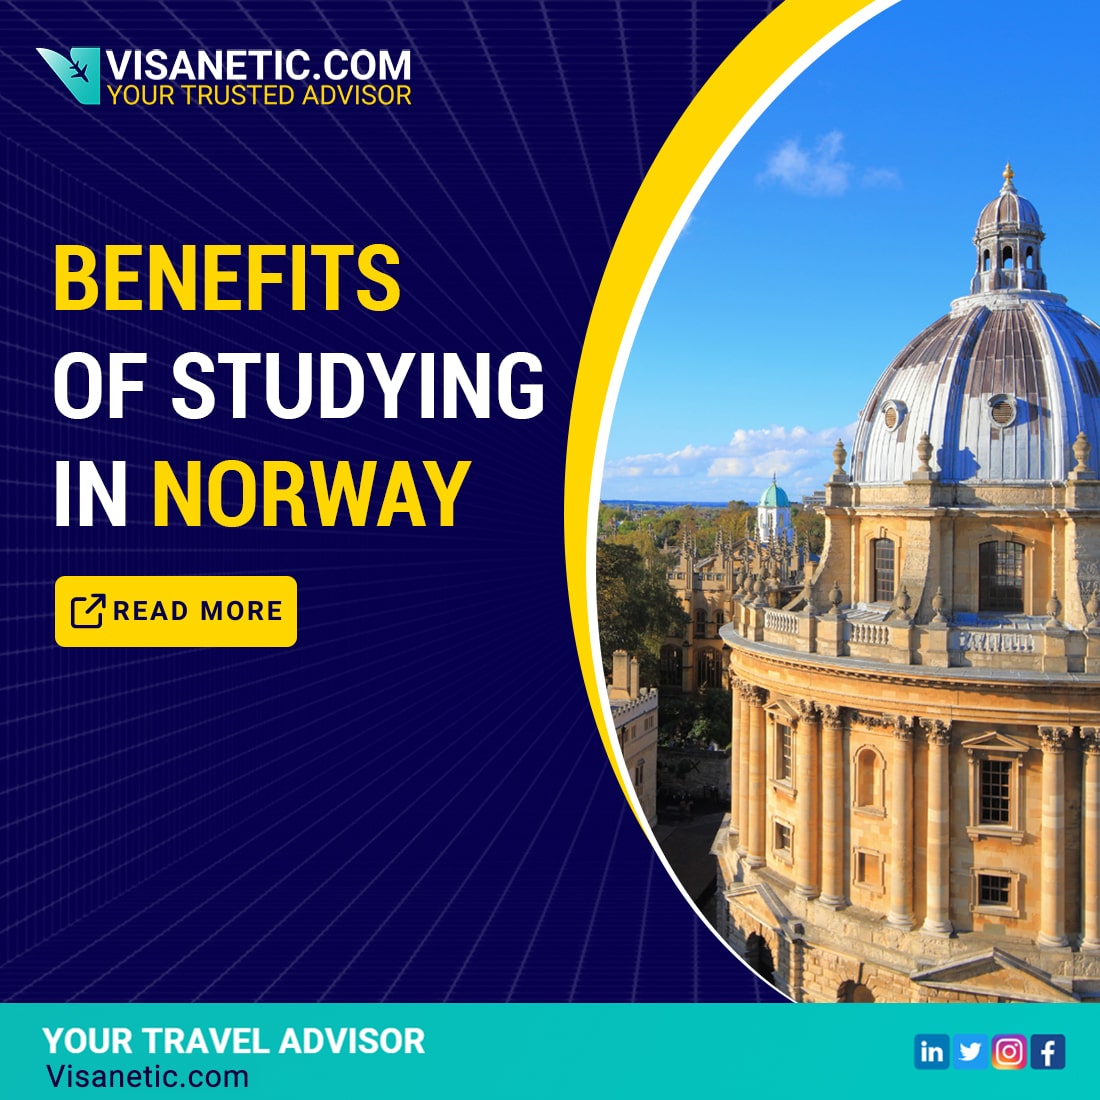 6 Reasons to Consider Studying in Norway